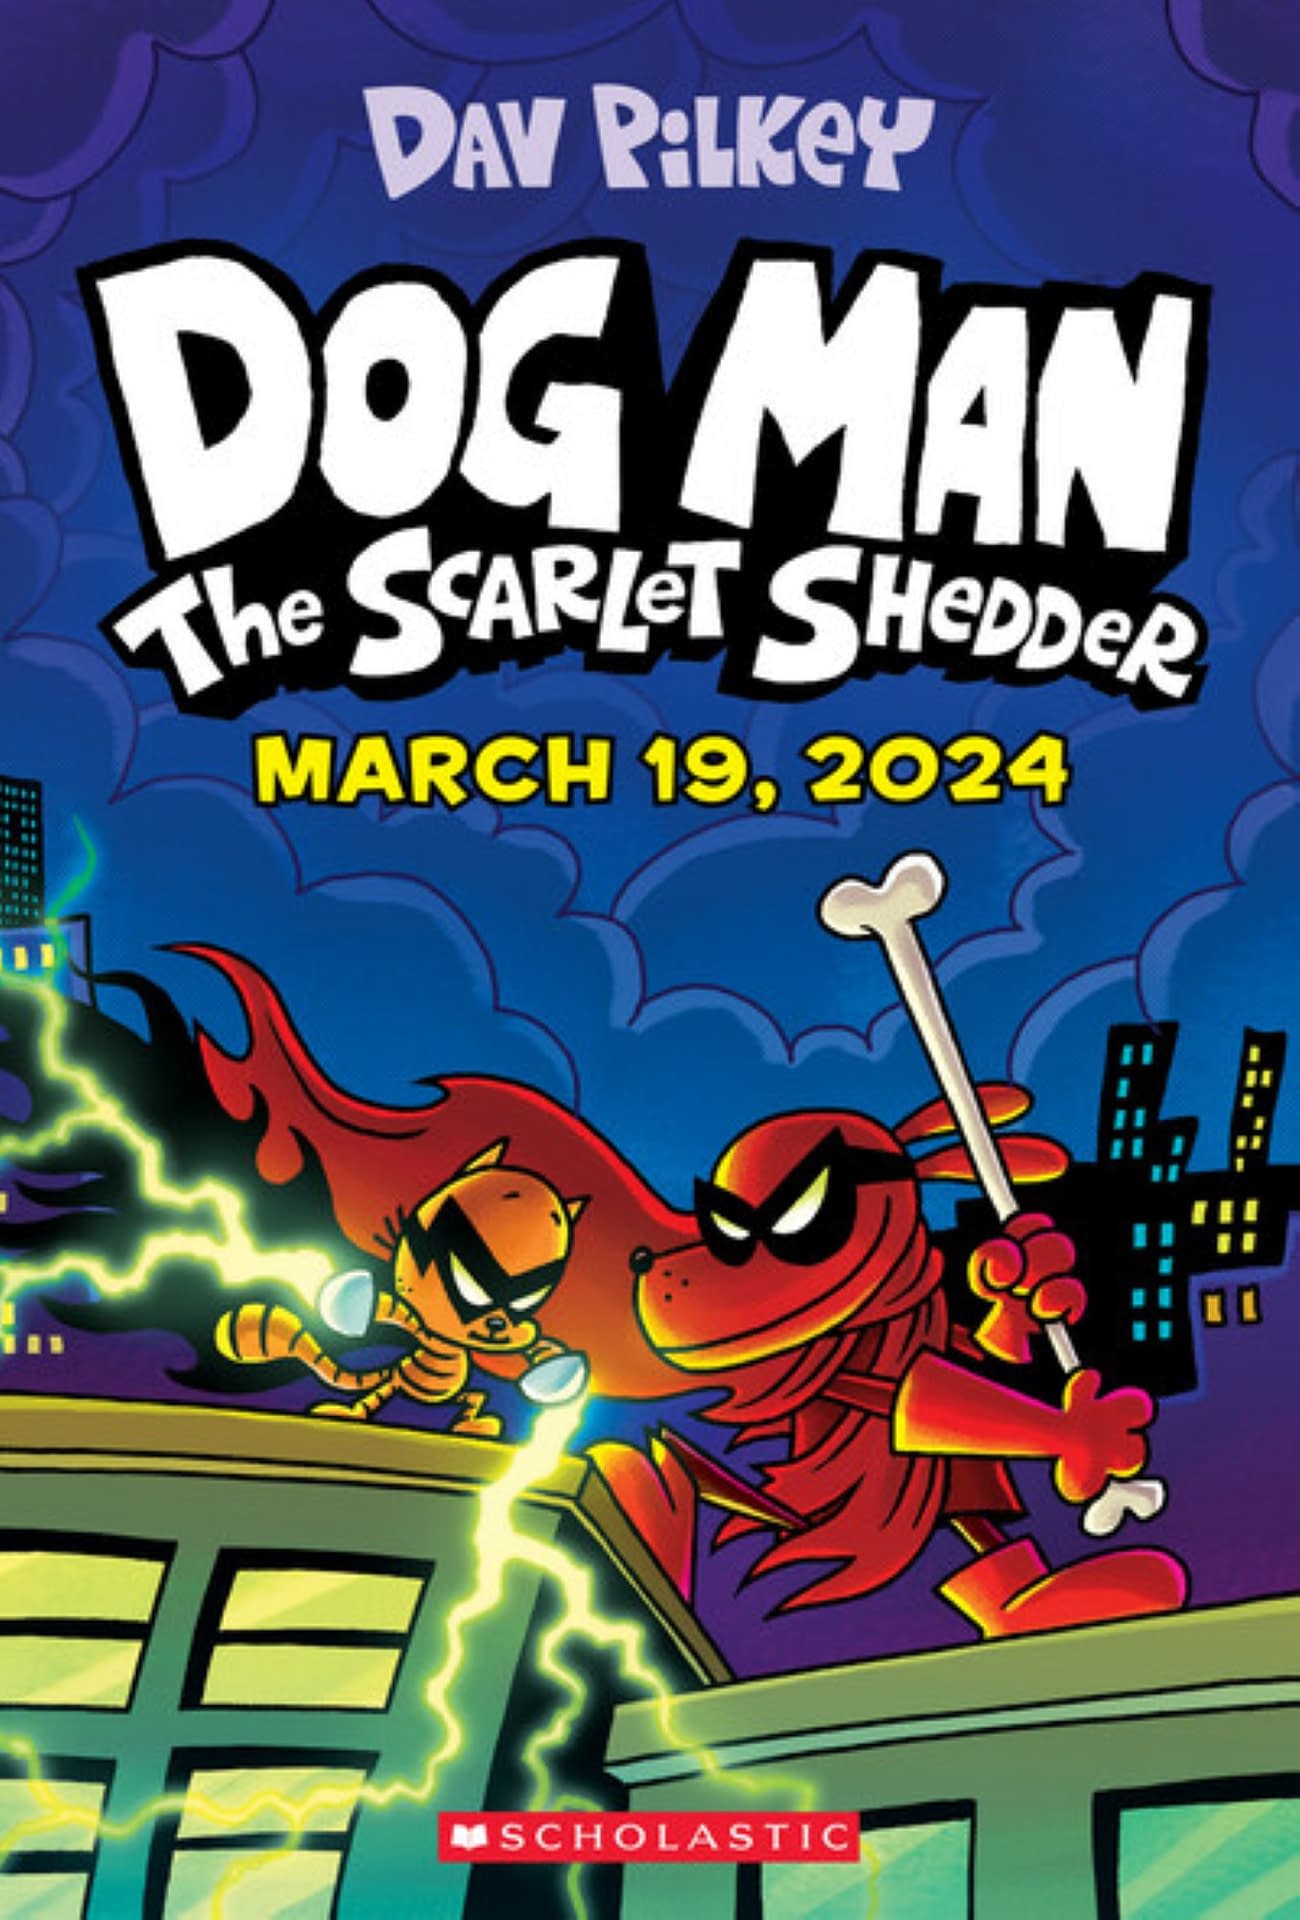 Dog Man The Scarlet Shedder Will Be USA's BestSelling Book Next Year